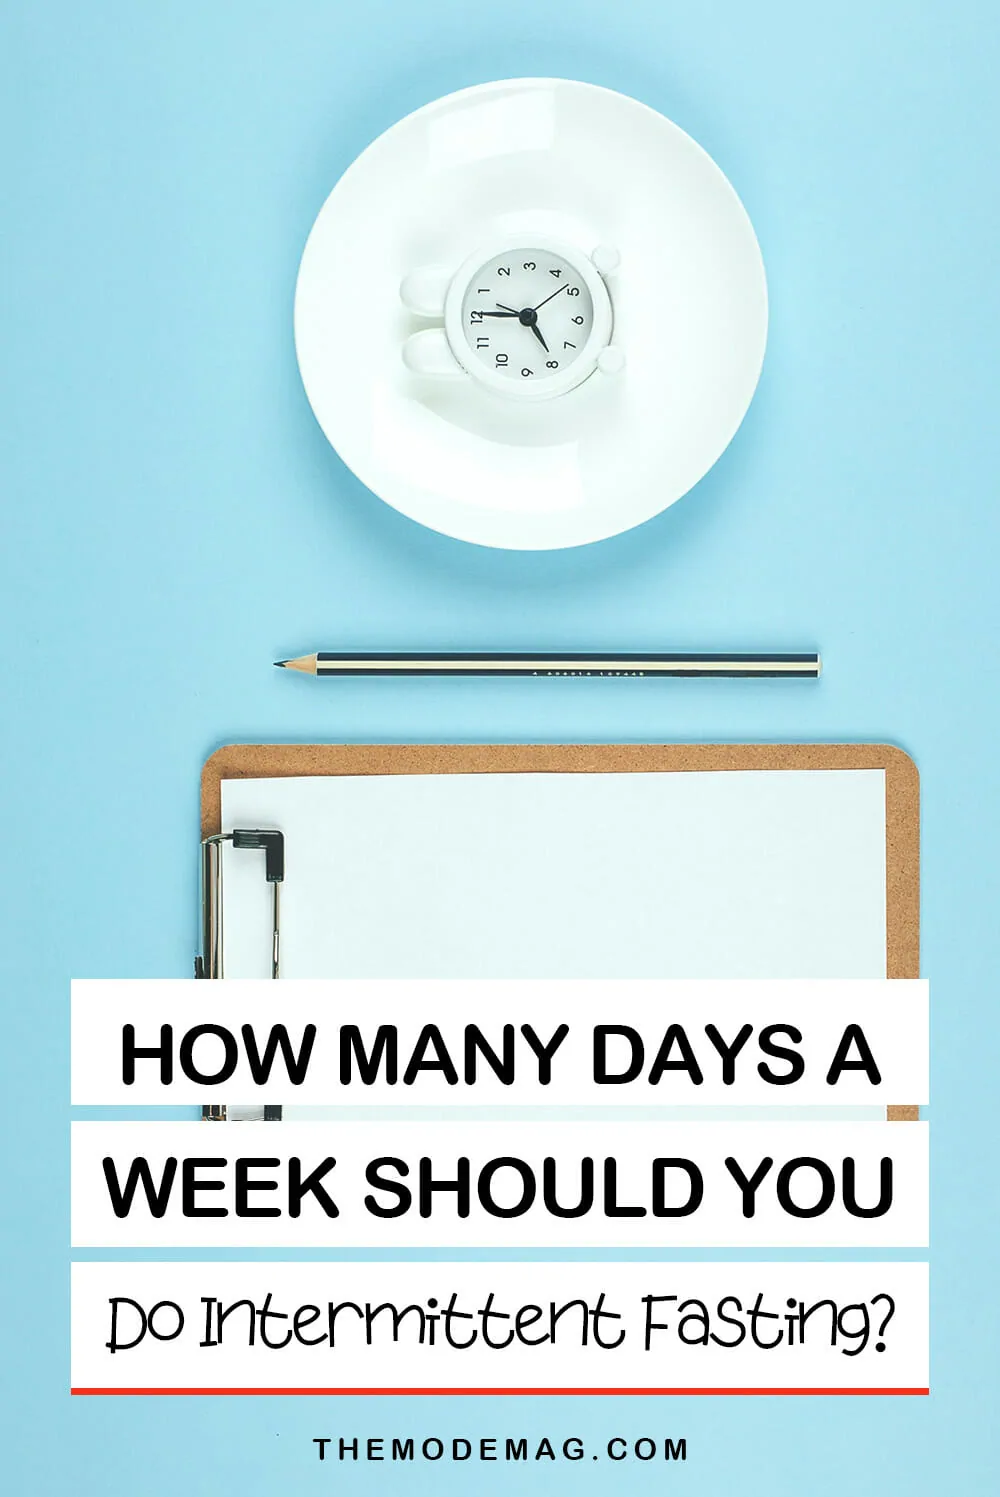 How Many Days A Week Should You Do Intermittent Fasting?